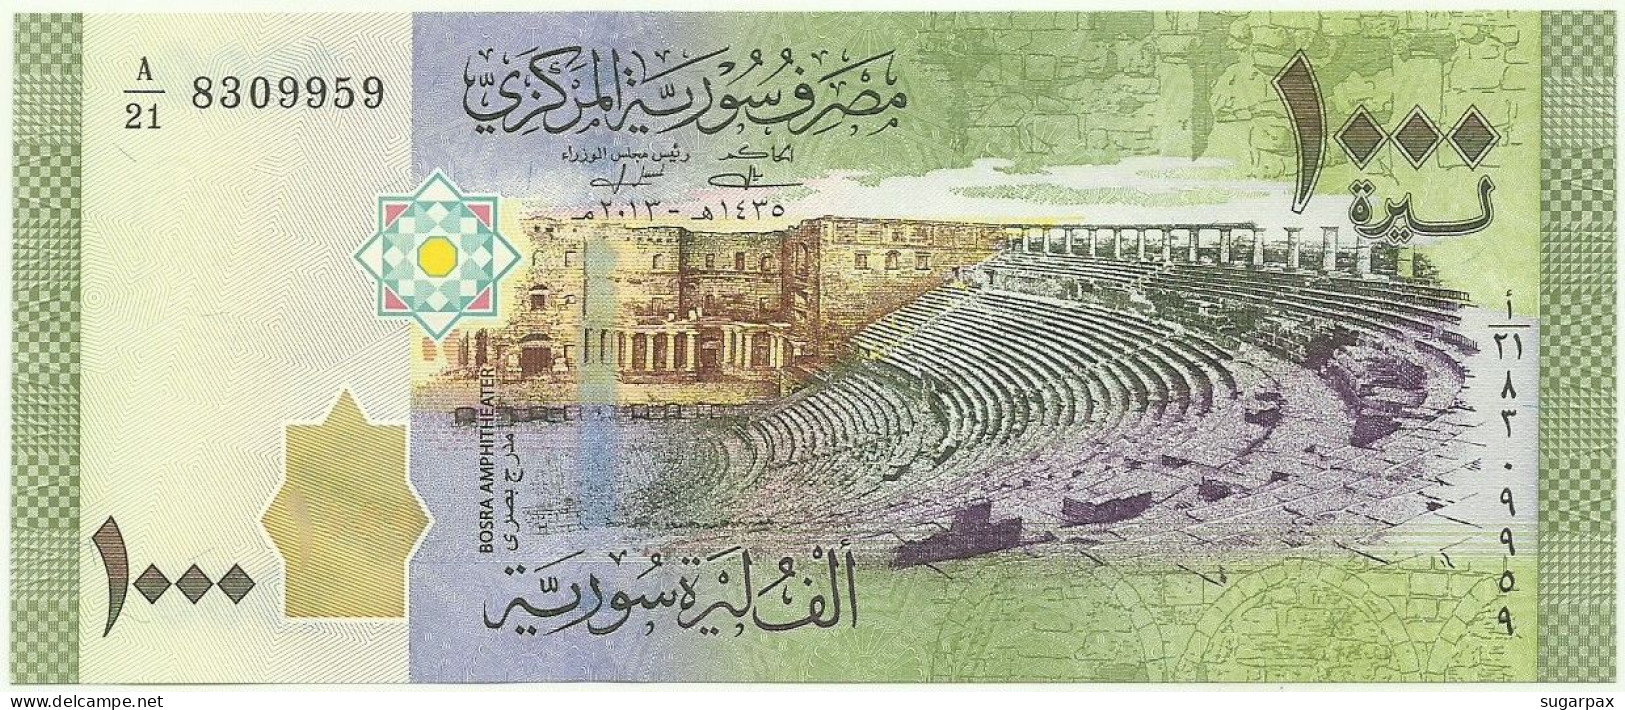 Syria - 1000 Syrian Pounds - 2013 / AH 1434 - Pick 116 - Unc. - Serie A/21 - 1.000 - Syrien